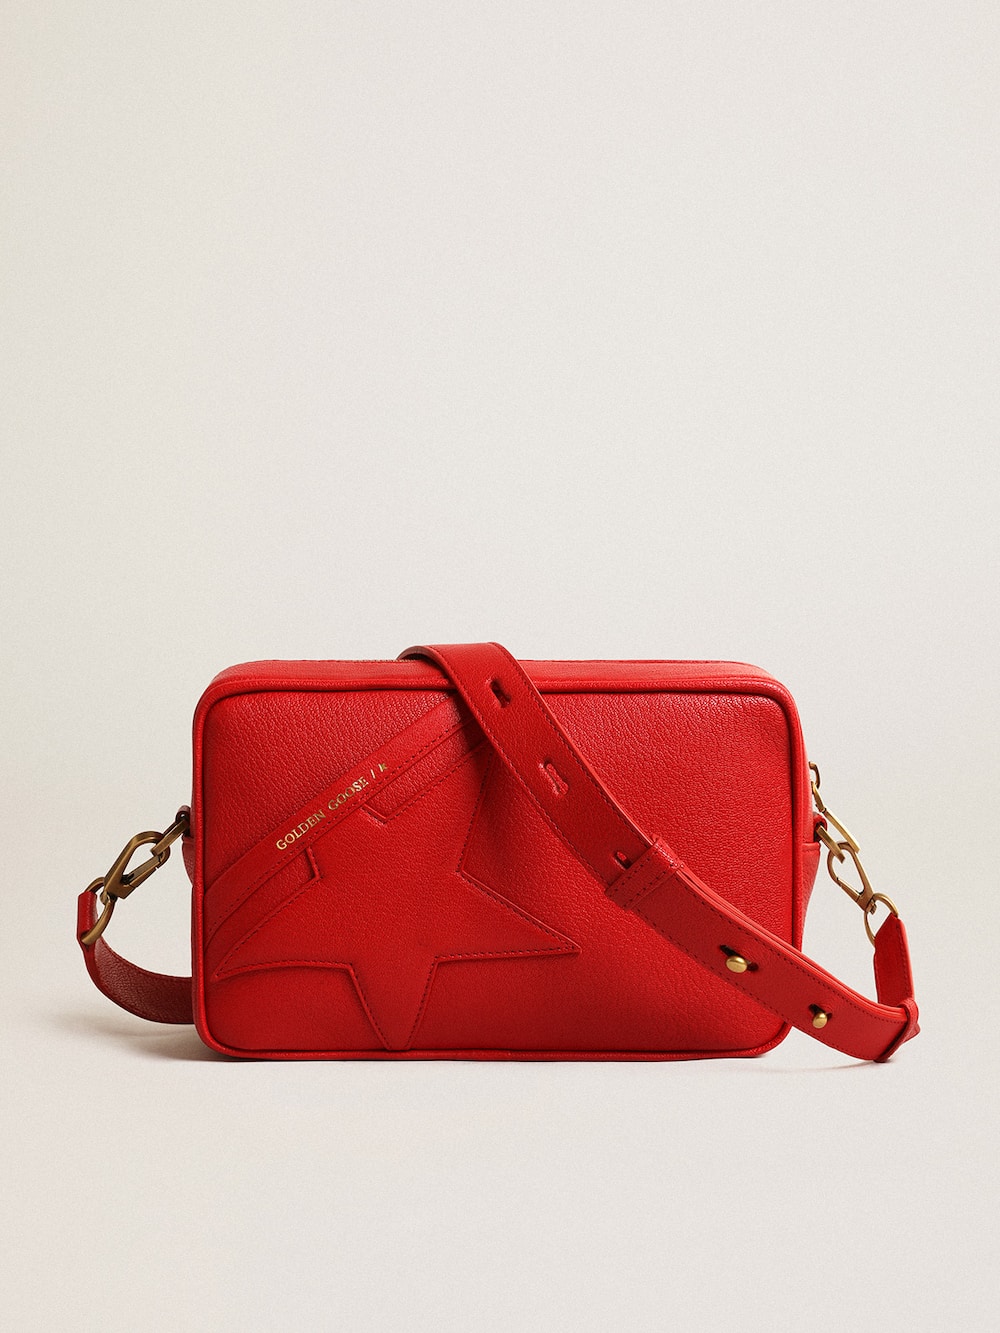 Golden Goose - Star Bag Donna in pelle color rosso acceso in 